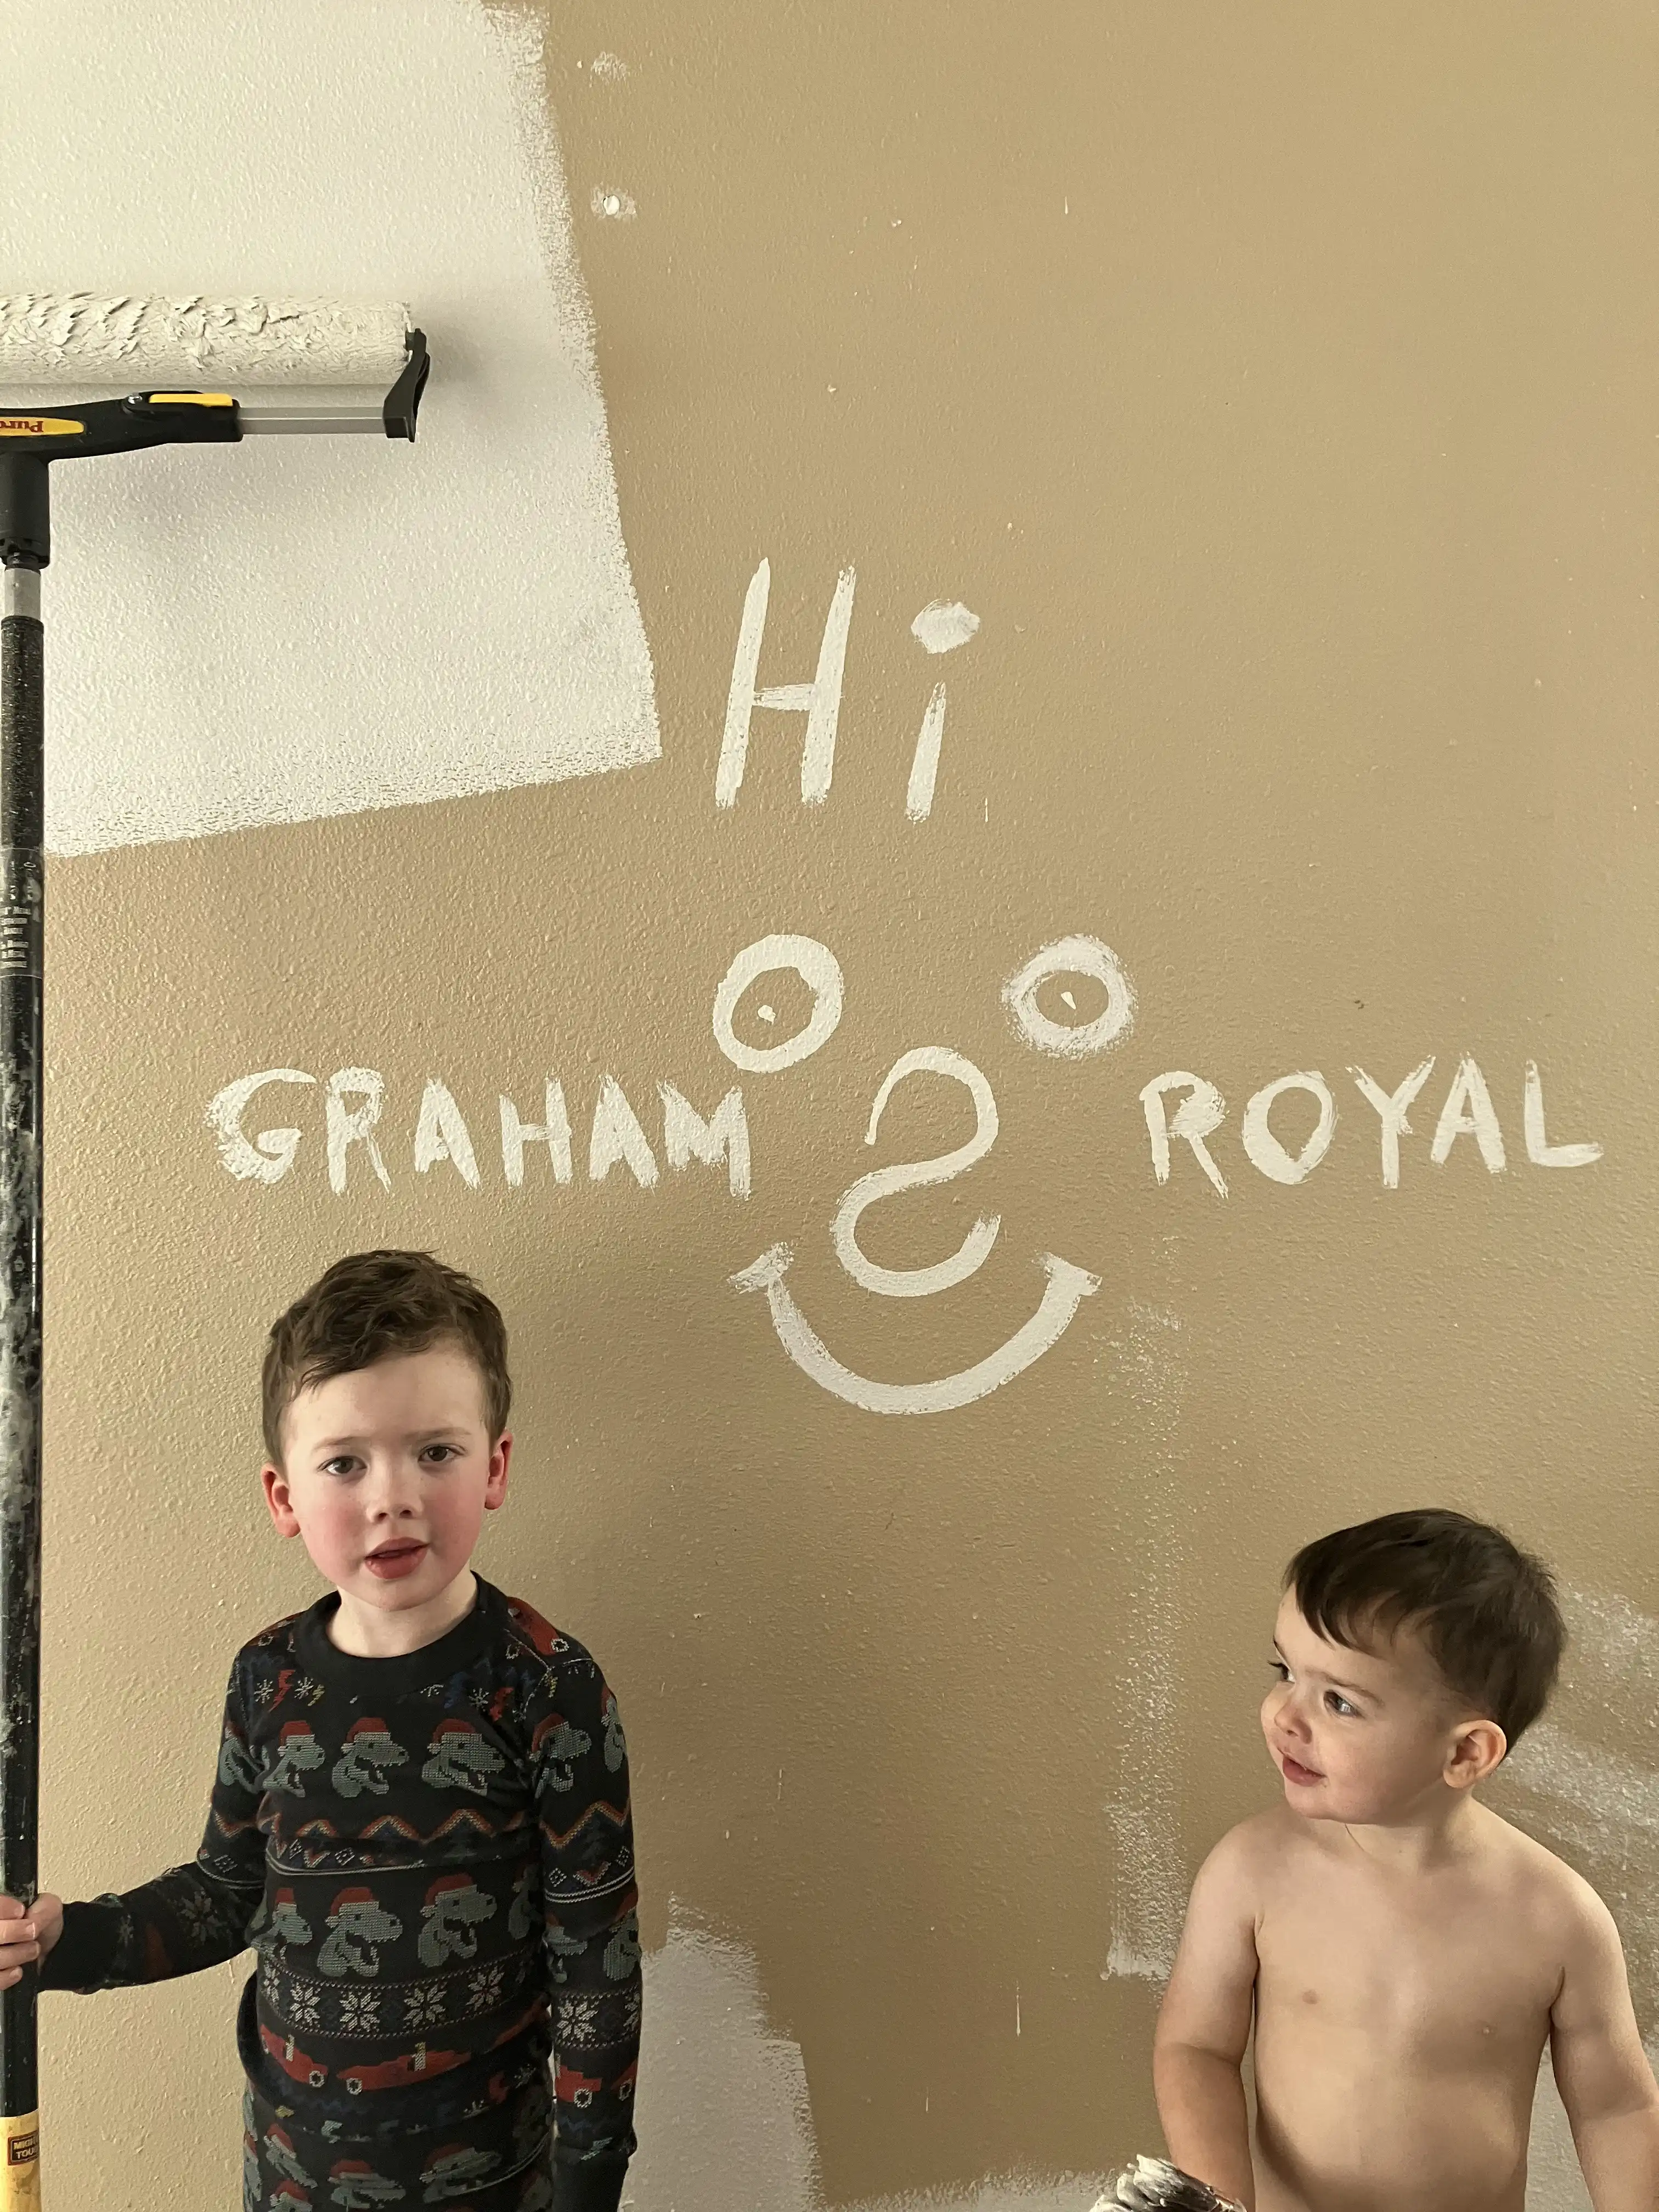 Graham holding a paint roller next to Royal. On the wall behind are their names and a smiley face in white primer over the brown wall color.